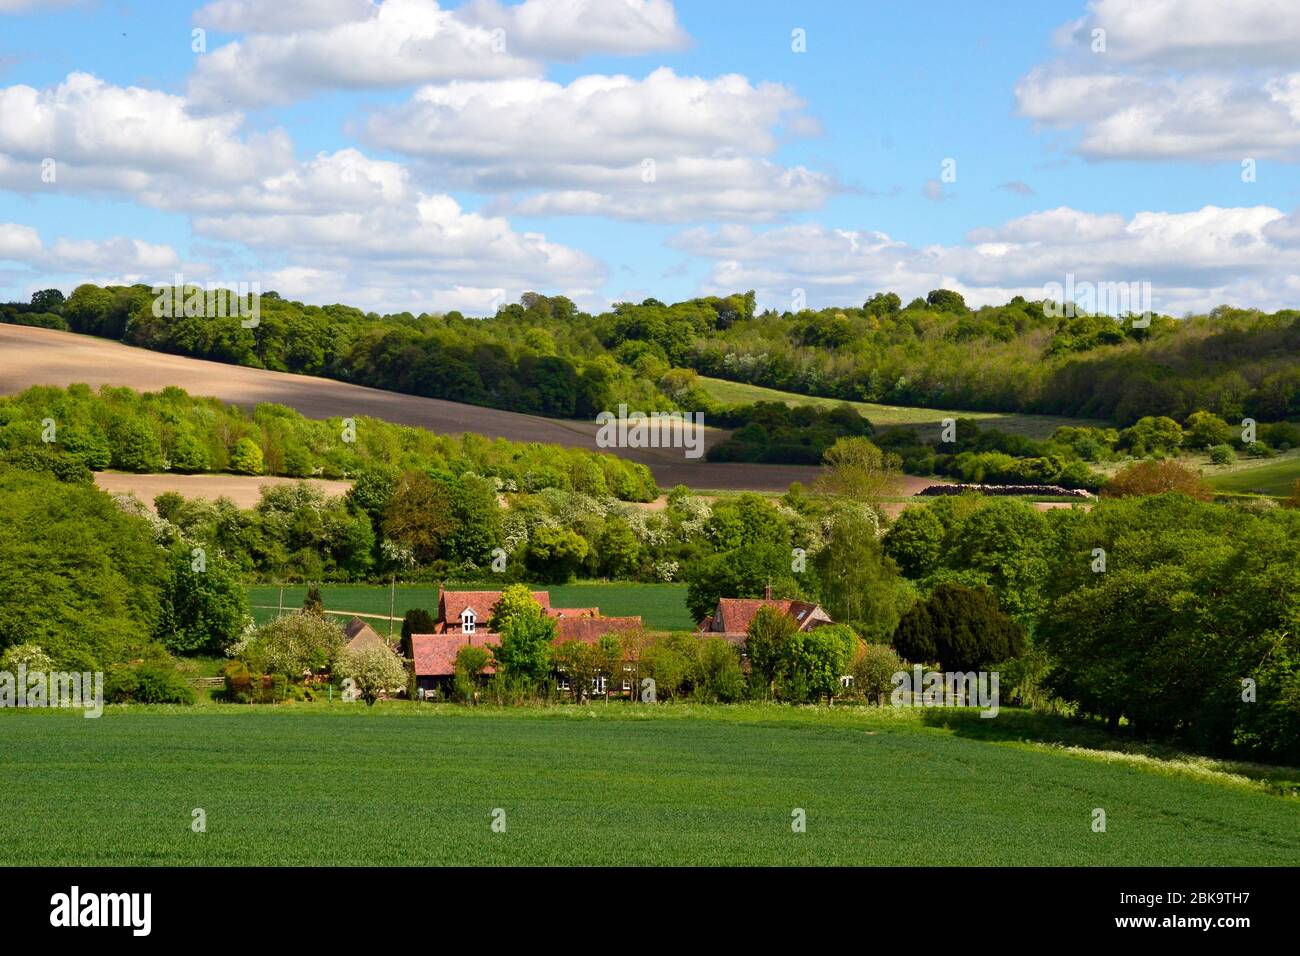 View of country houses, nestled amongst the hills and valleys, in the West Wycombe countryside, Buckinghamshire, UK. Chiltern Hills. Stock Photo